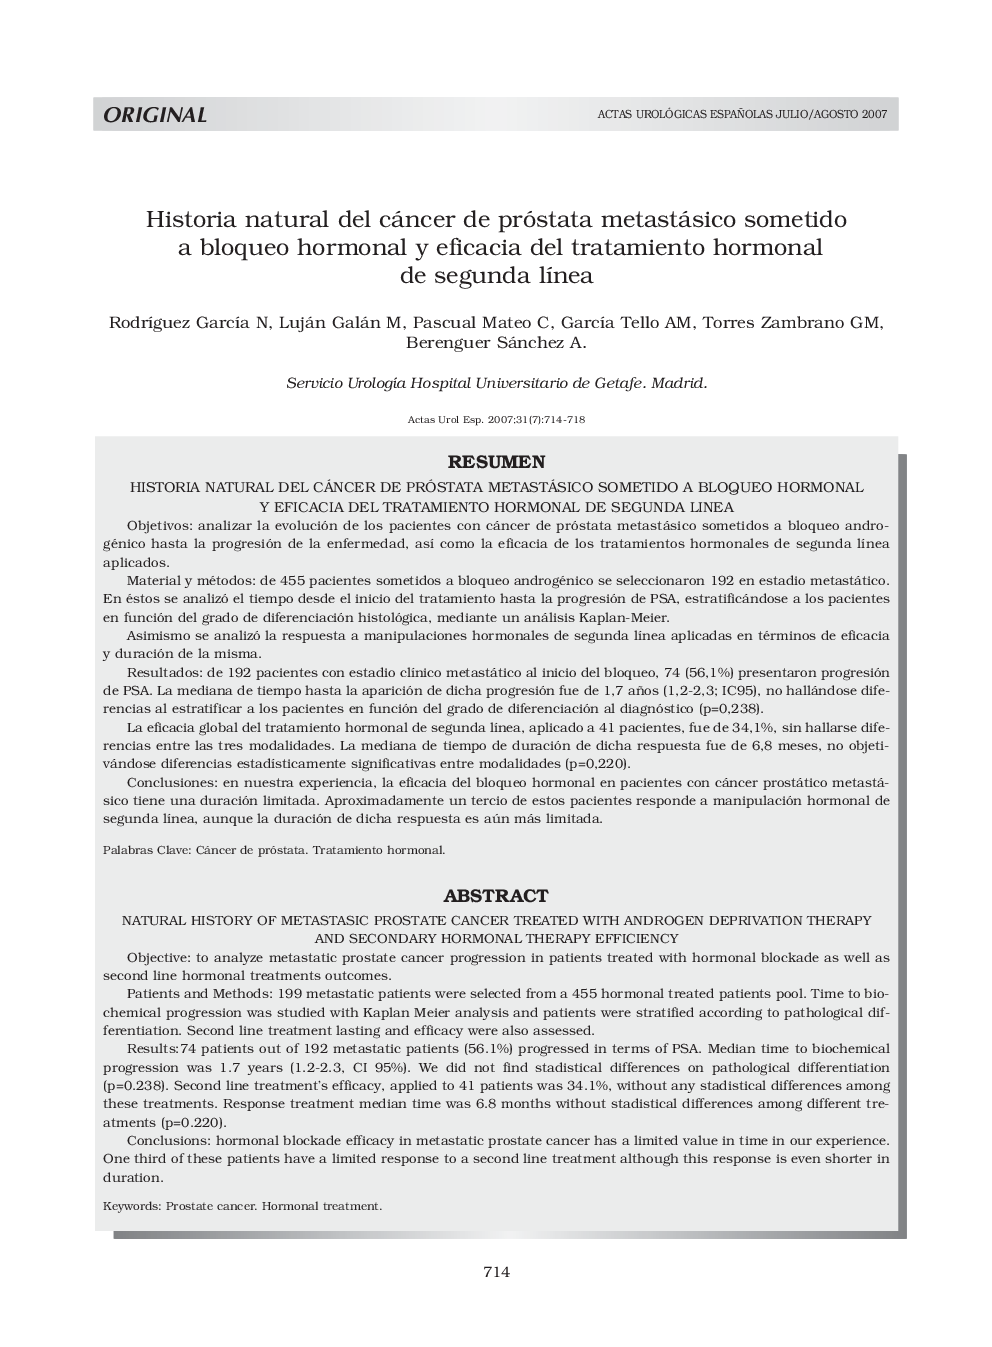 Historia natural del cáncer de próstata metastásico sometido a bloqueo hormonal y eficacia del tratamiento hormonal de segunda lÃ­neaNatural History Of Metastasic Prostate Cancer Treated With Androgen Deprivation Therapy And Secondary Hormonal Therapy 